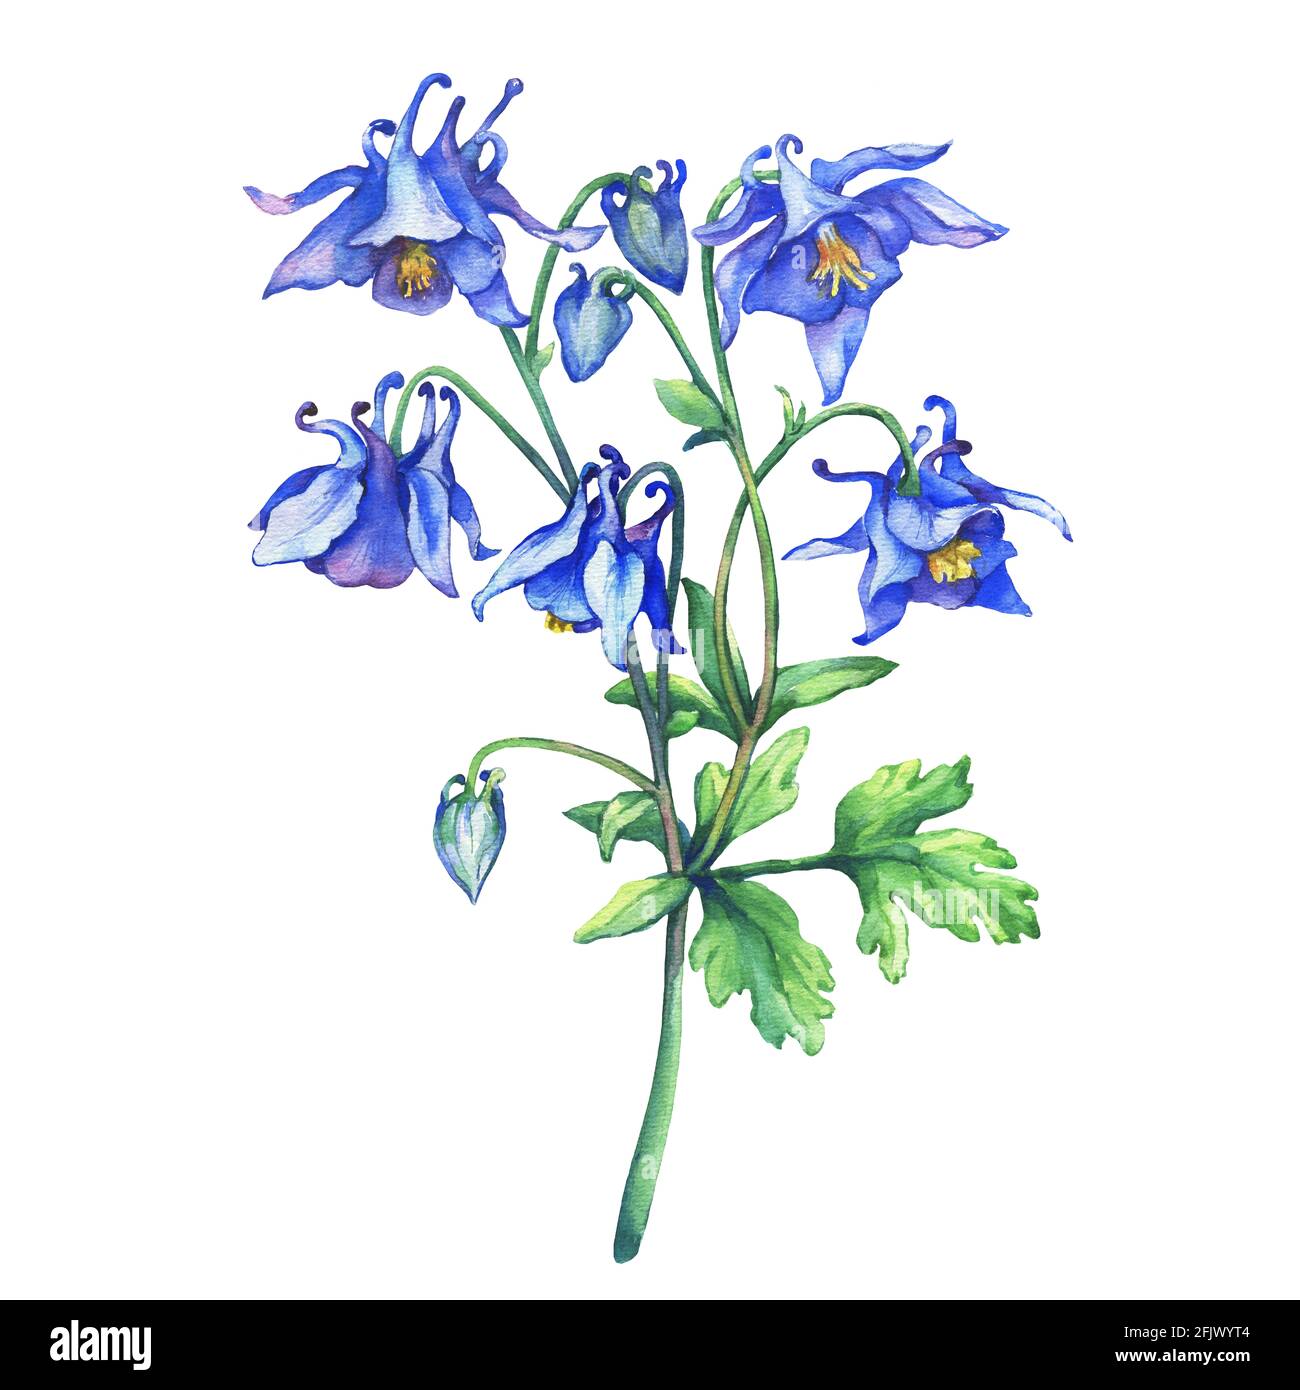 The branch flowering blue Aquilegia (common names: granny's bonnet or columbine). Watercolor hand drawn painting illustration on white background. Stock Photo